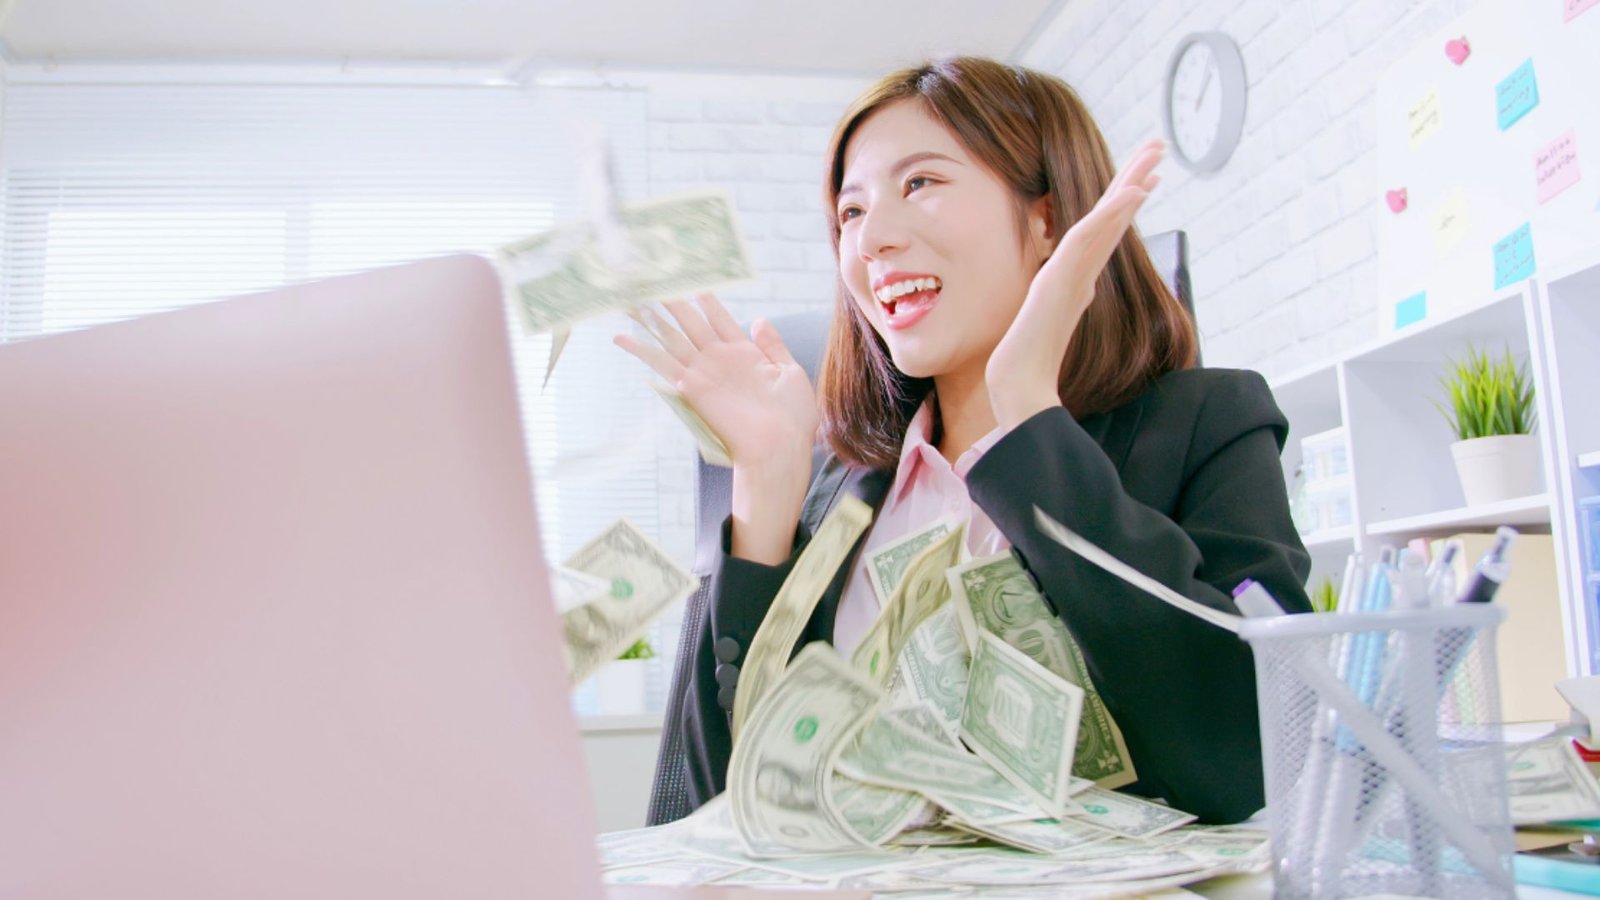 a lady looking happy with a laptop in her front and money